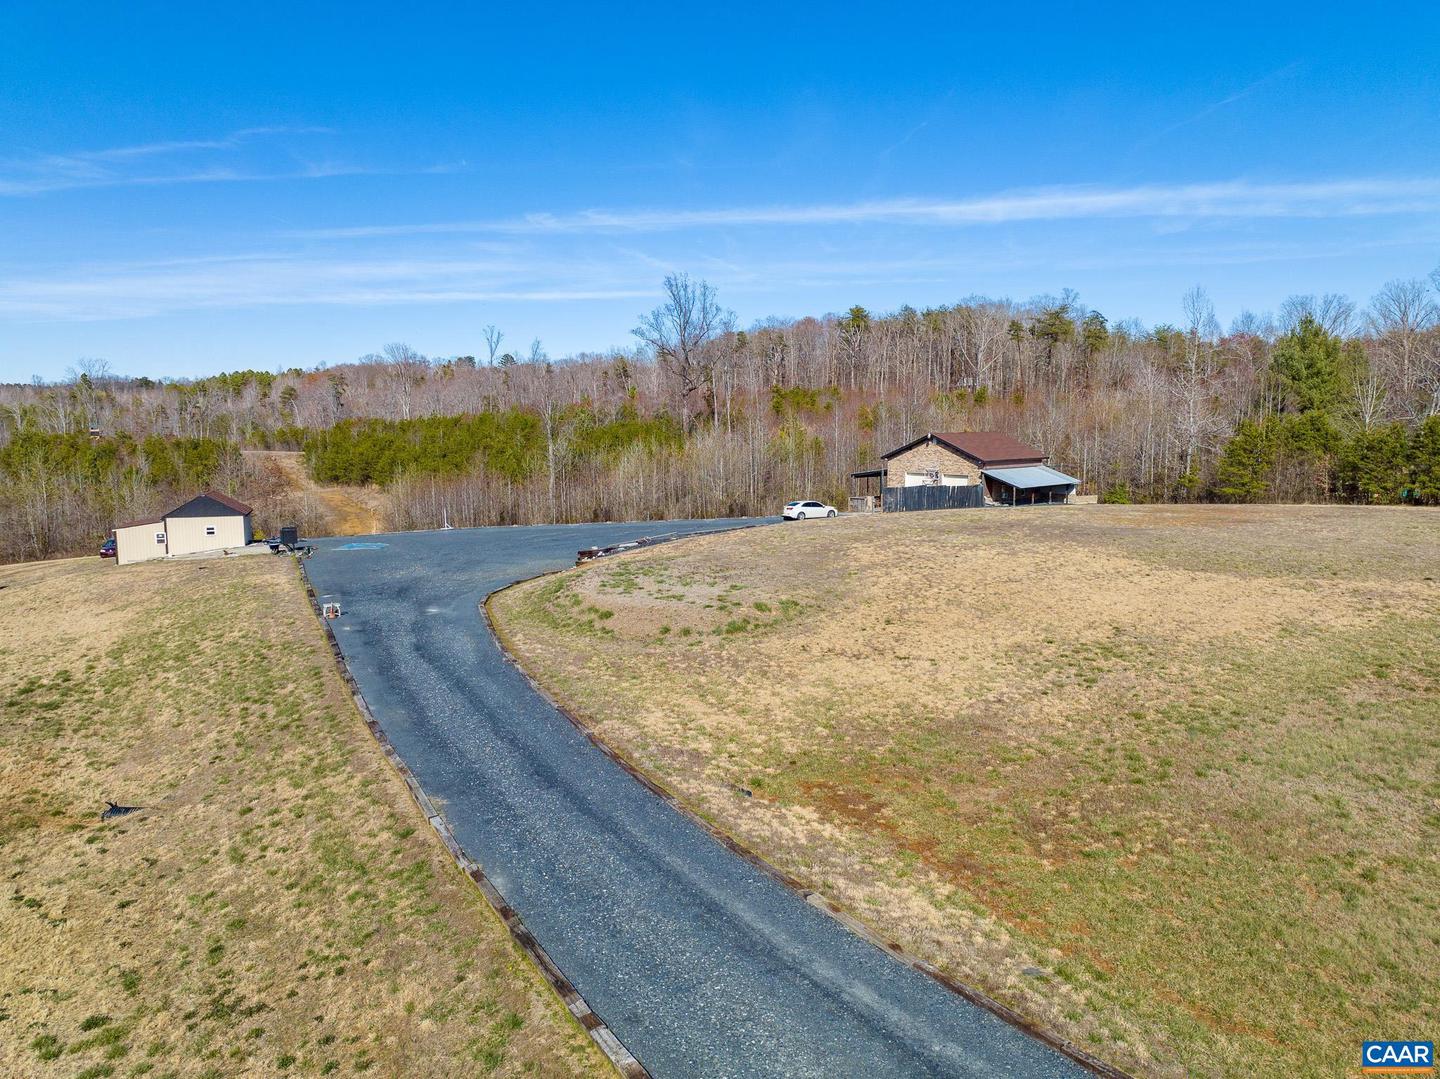 1337 STAGE JUNCTION RD, COLUMBIA, Virginia 23038, ,Land,For sale,1337 STAGE JUNCTION RD,639723 MLS # 639723